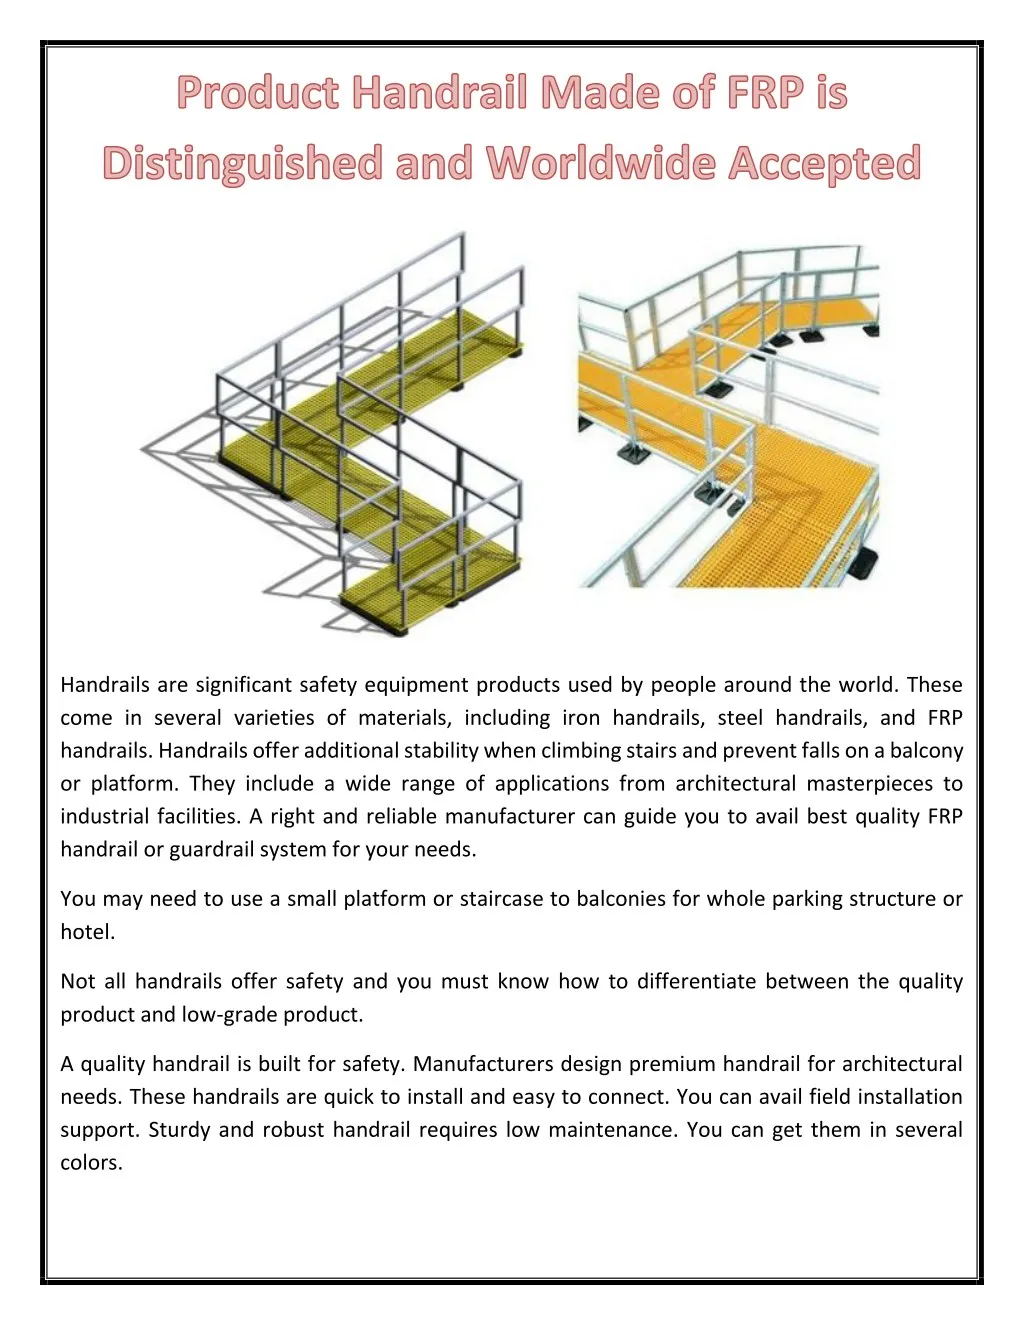 handrails are significant safety equipment